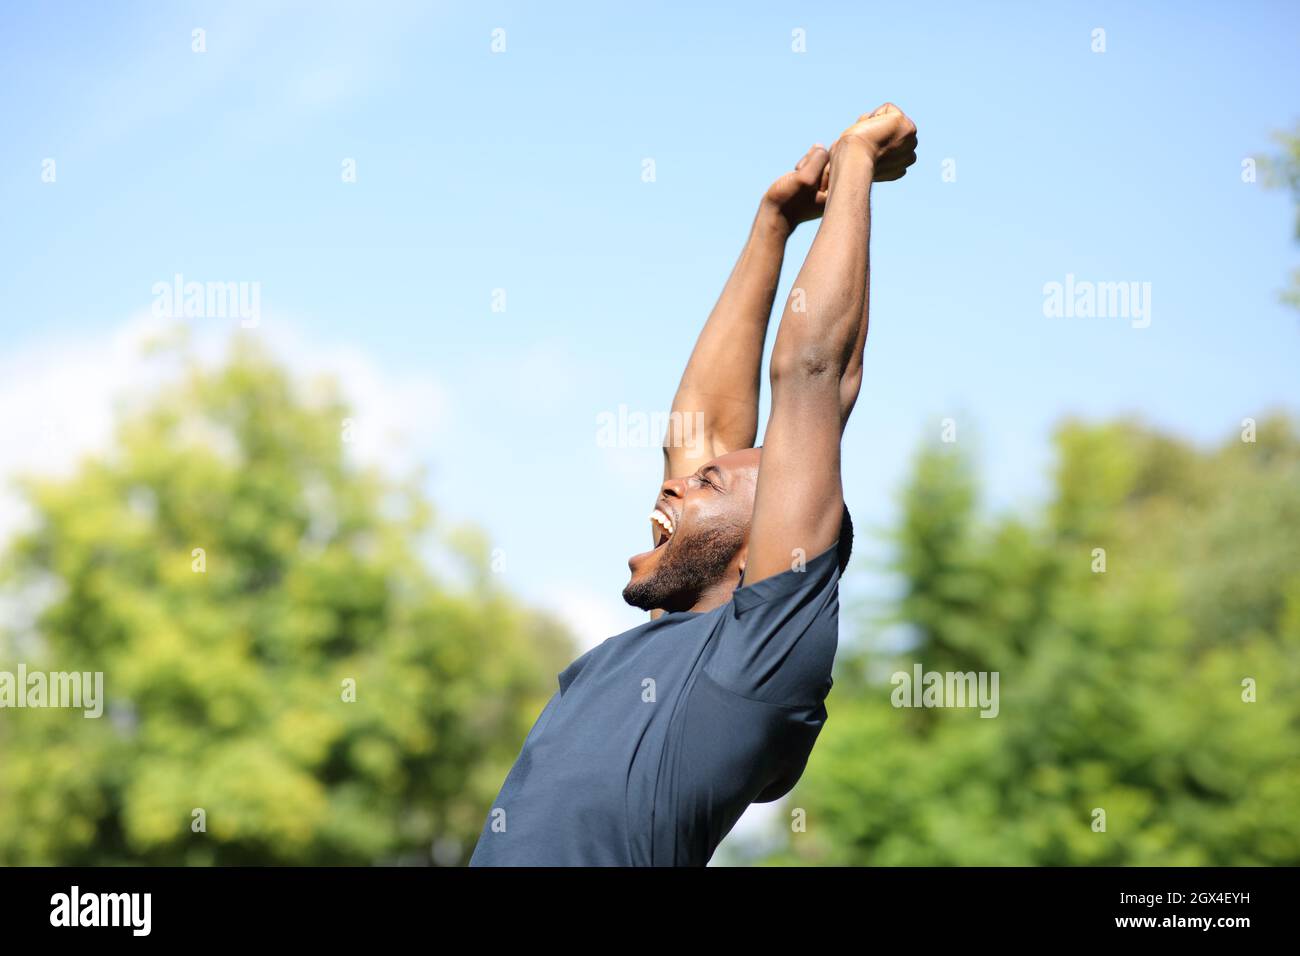 Side view portrait of an excited black man raising arms in a park Stock Photo